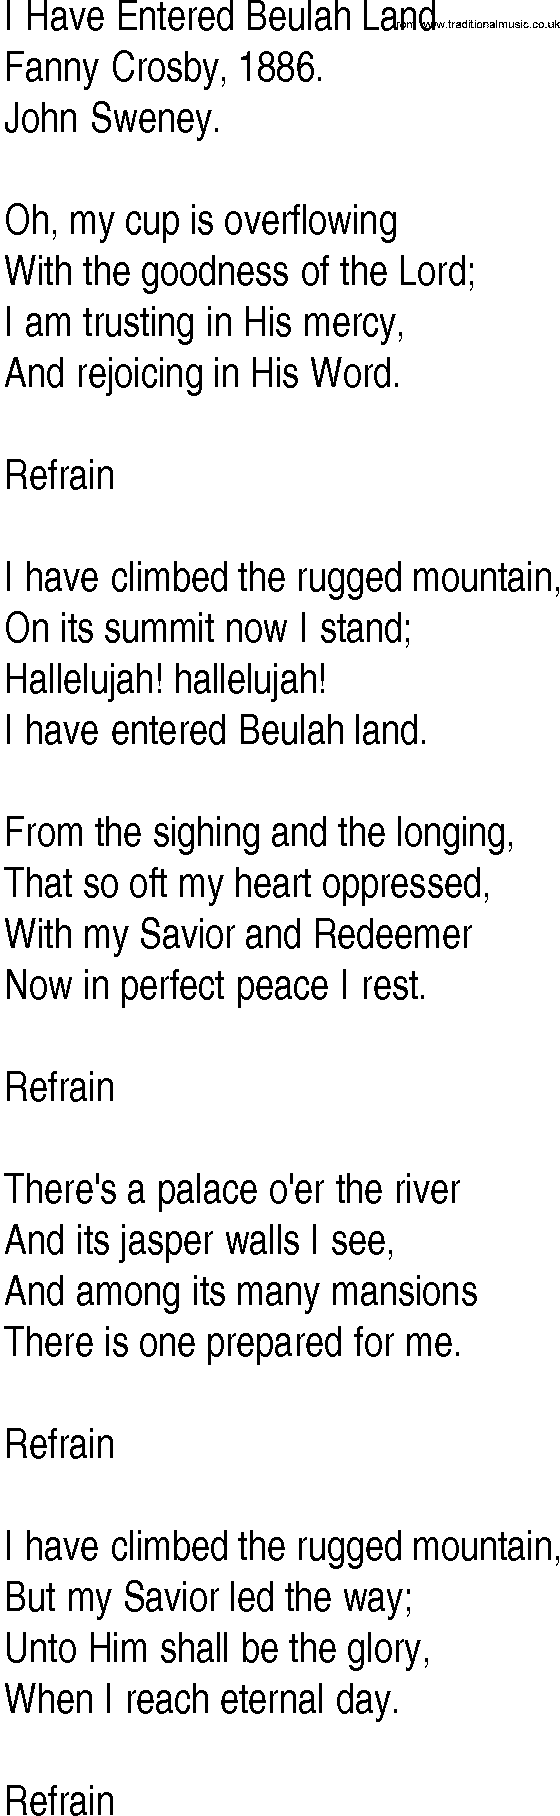 Hymn and Gospel Song: I Have Entered Beulah Land by Fanny Crosby lyrics